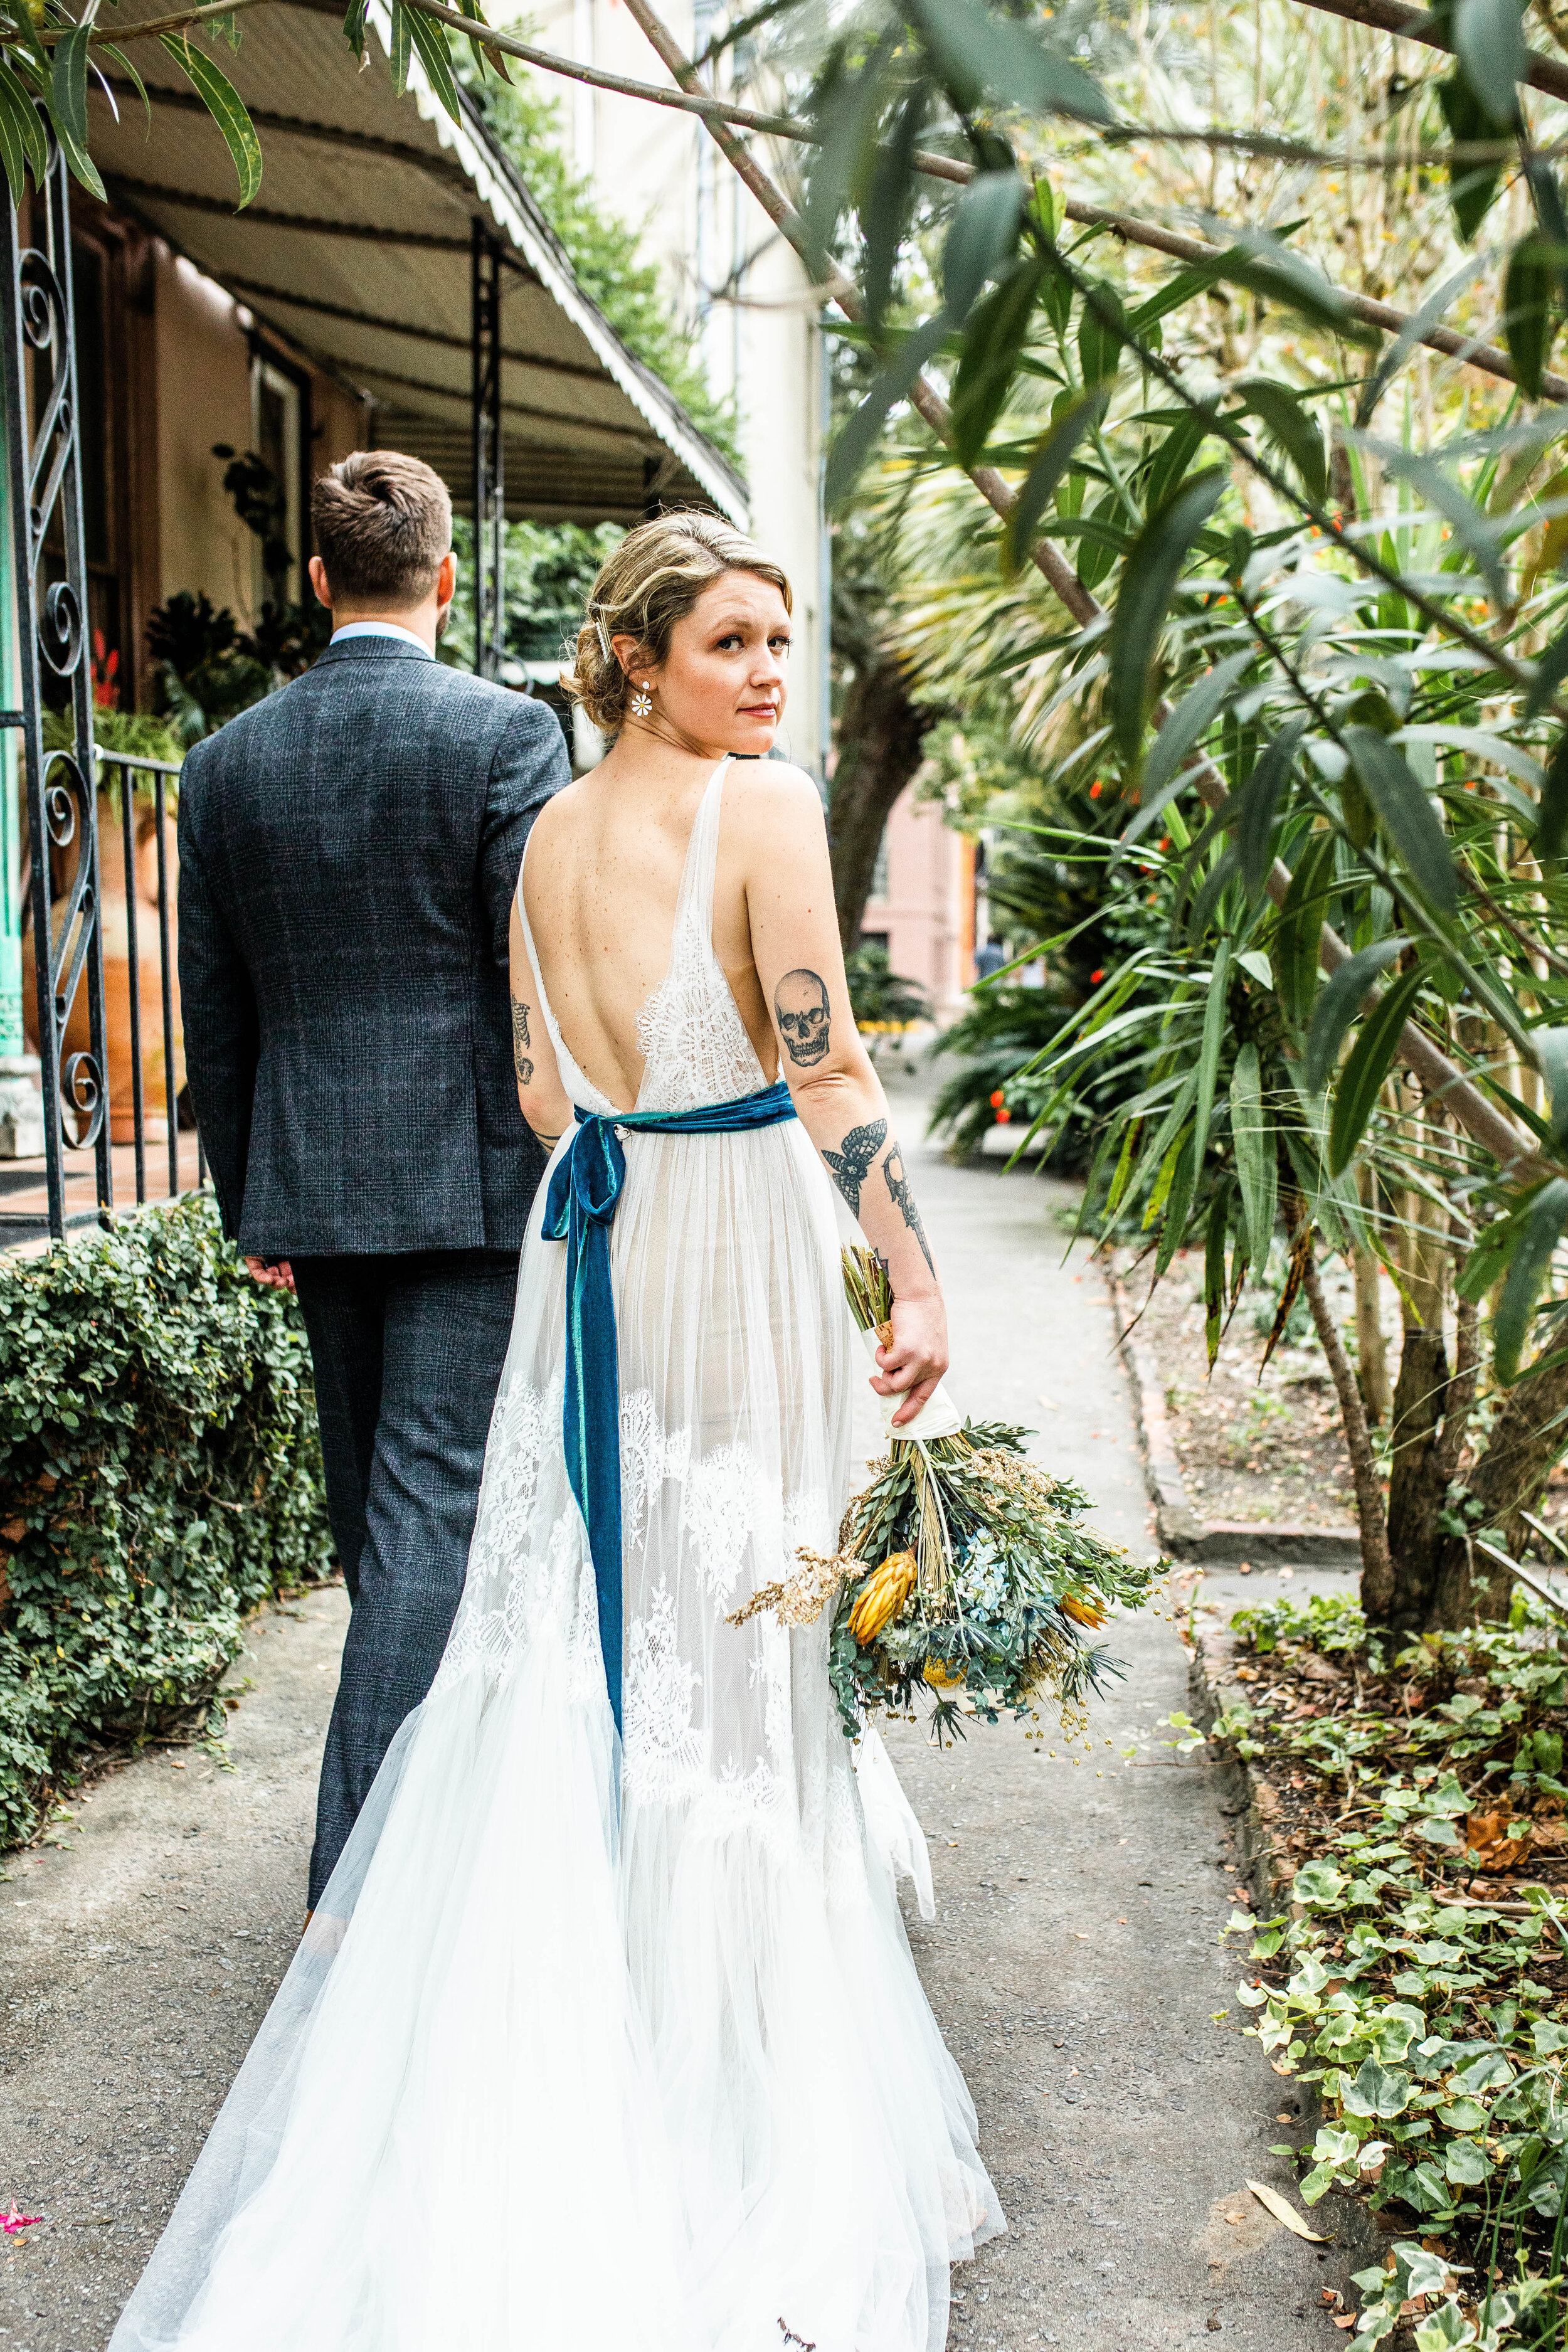 ivory-and-beau-bride-down-for-the-gown-blog-wedding-blog-bridal-blog-wedding-dress-bridal-gown-wedding-gown-clementine-willowby-boho-bride-boho-wedding-dress-Katie and David-3587.jpg